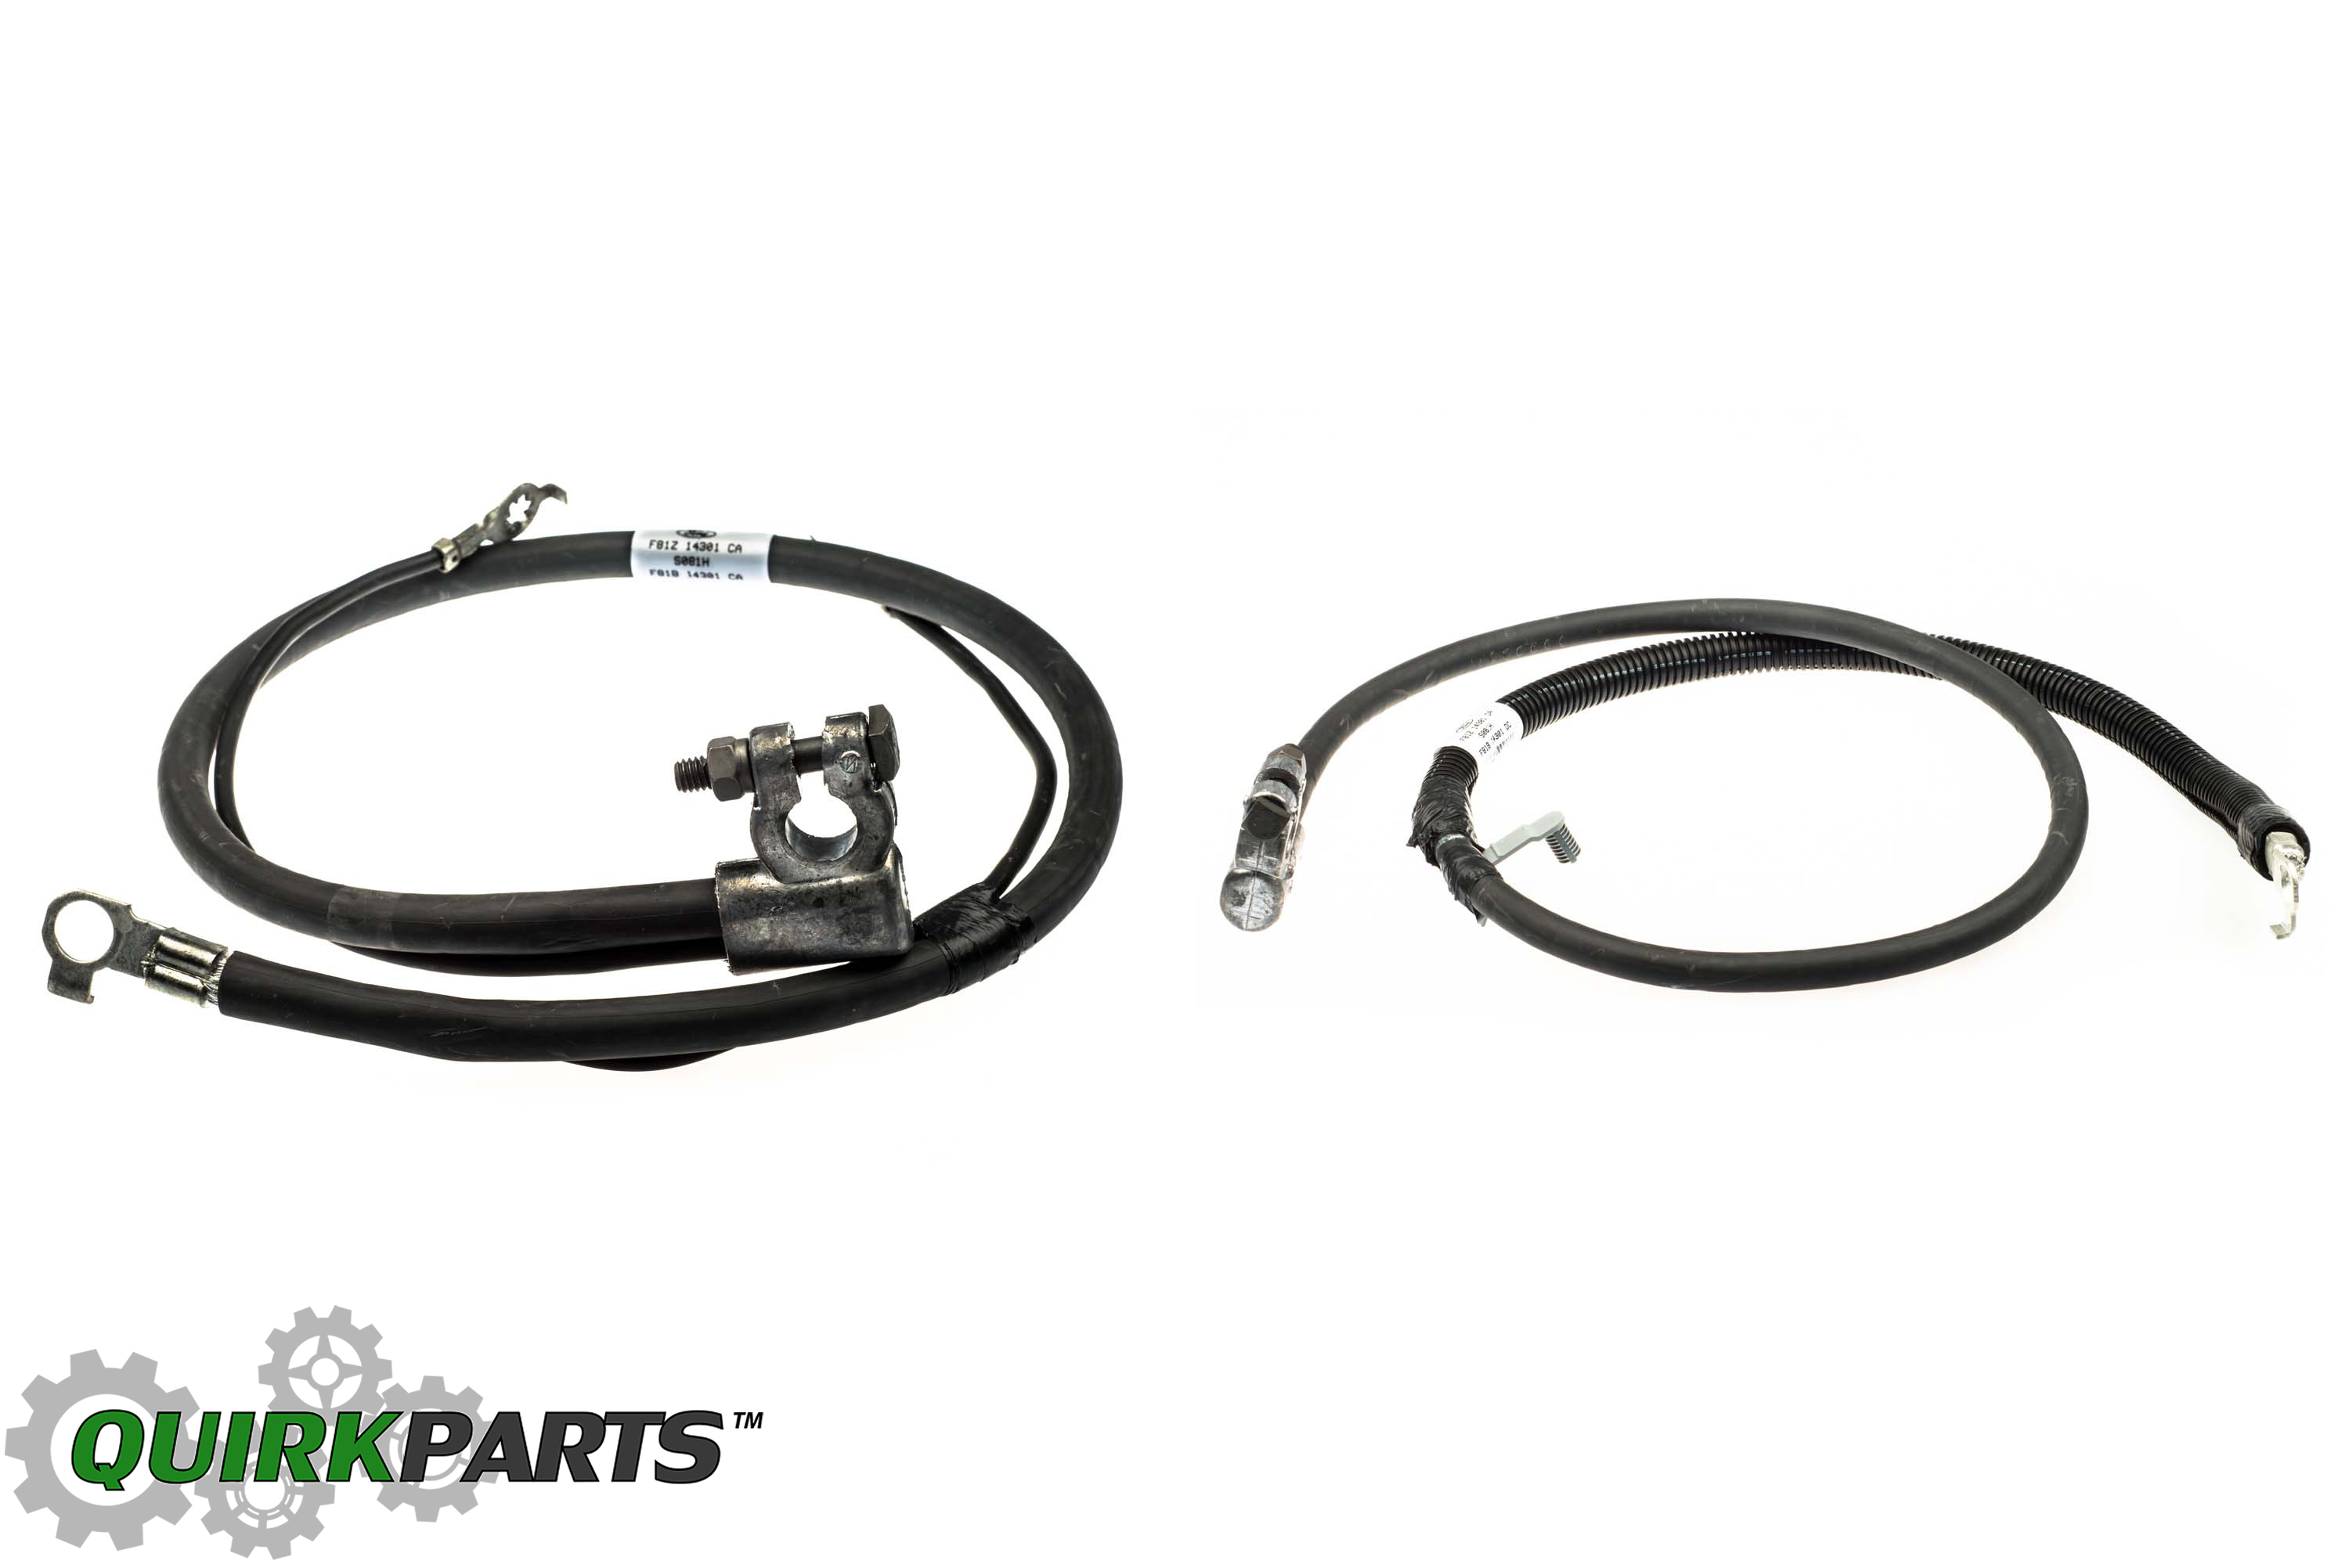 2001 Ford f250 battery cables #9